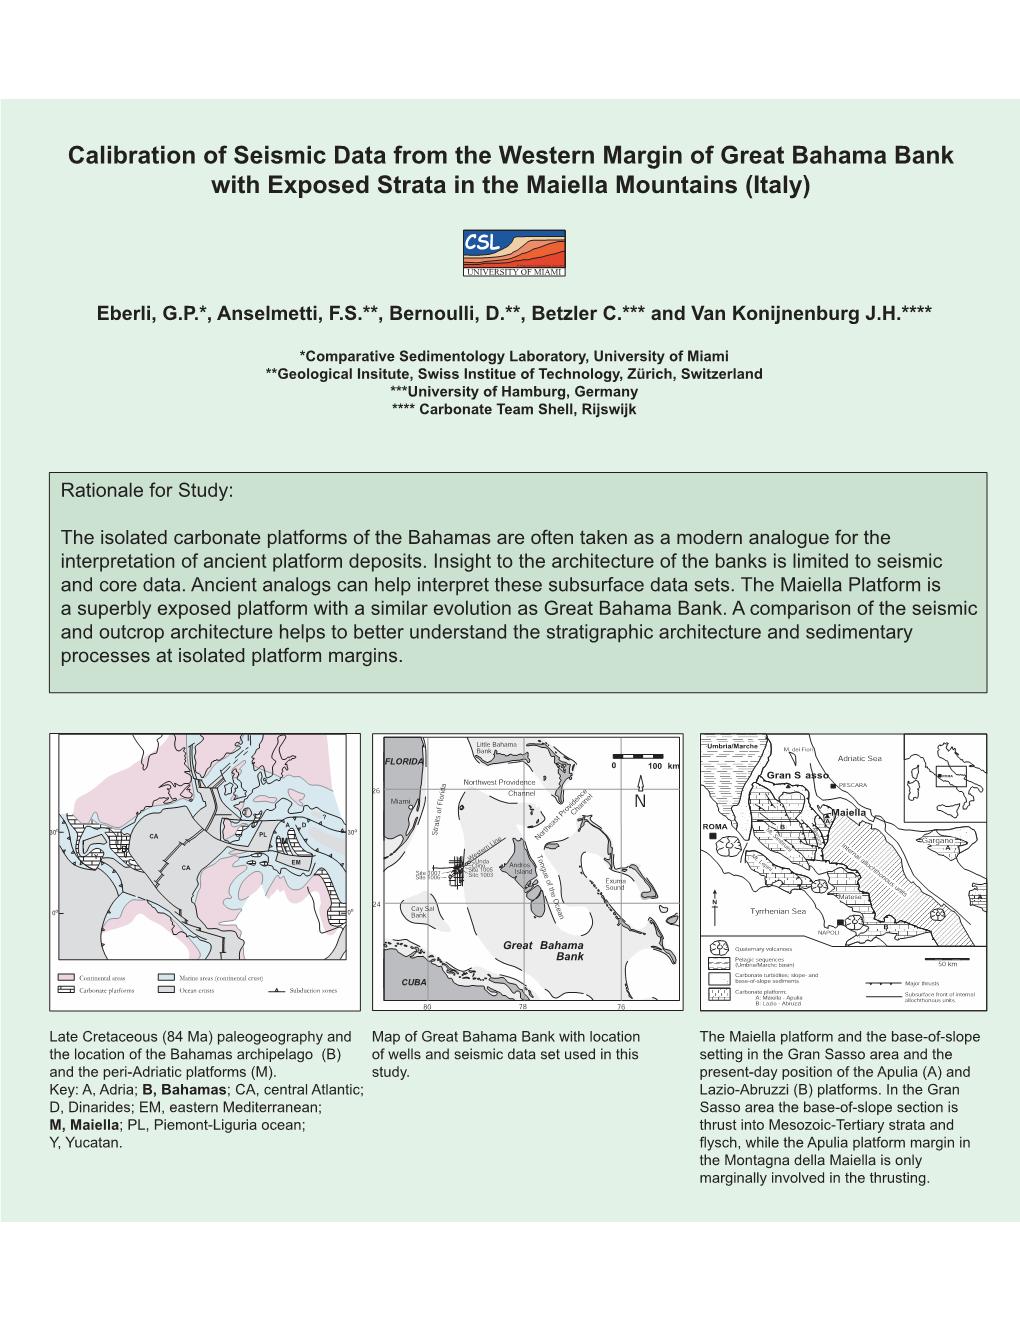 Calibration of Seismic Data from the Western Margin of Great Bahama Bank with Exposed Strata in the Maiella Mountains (Italy)